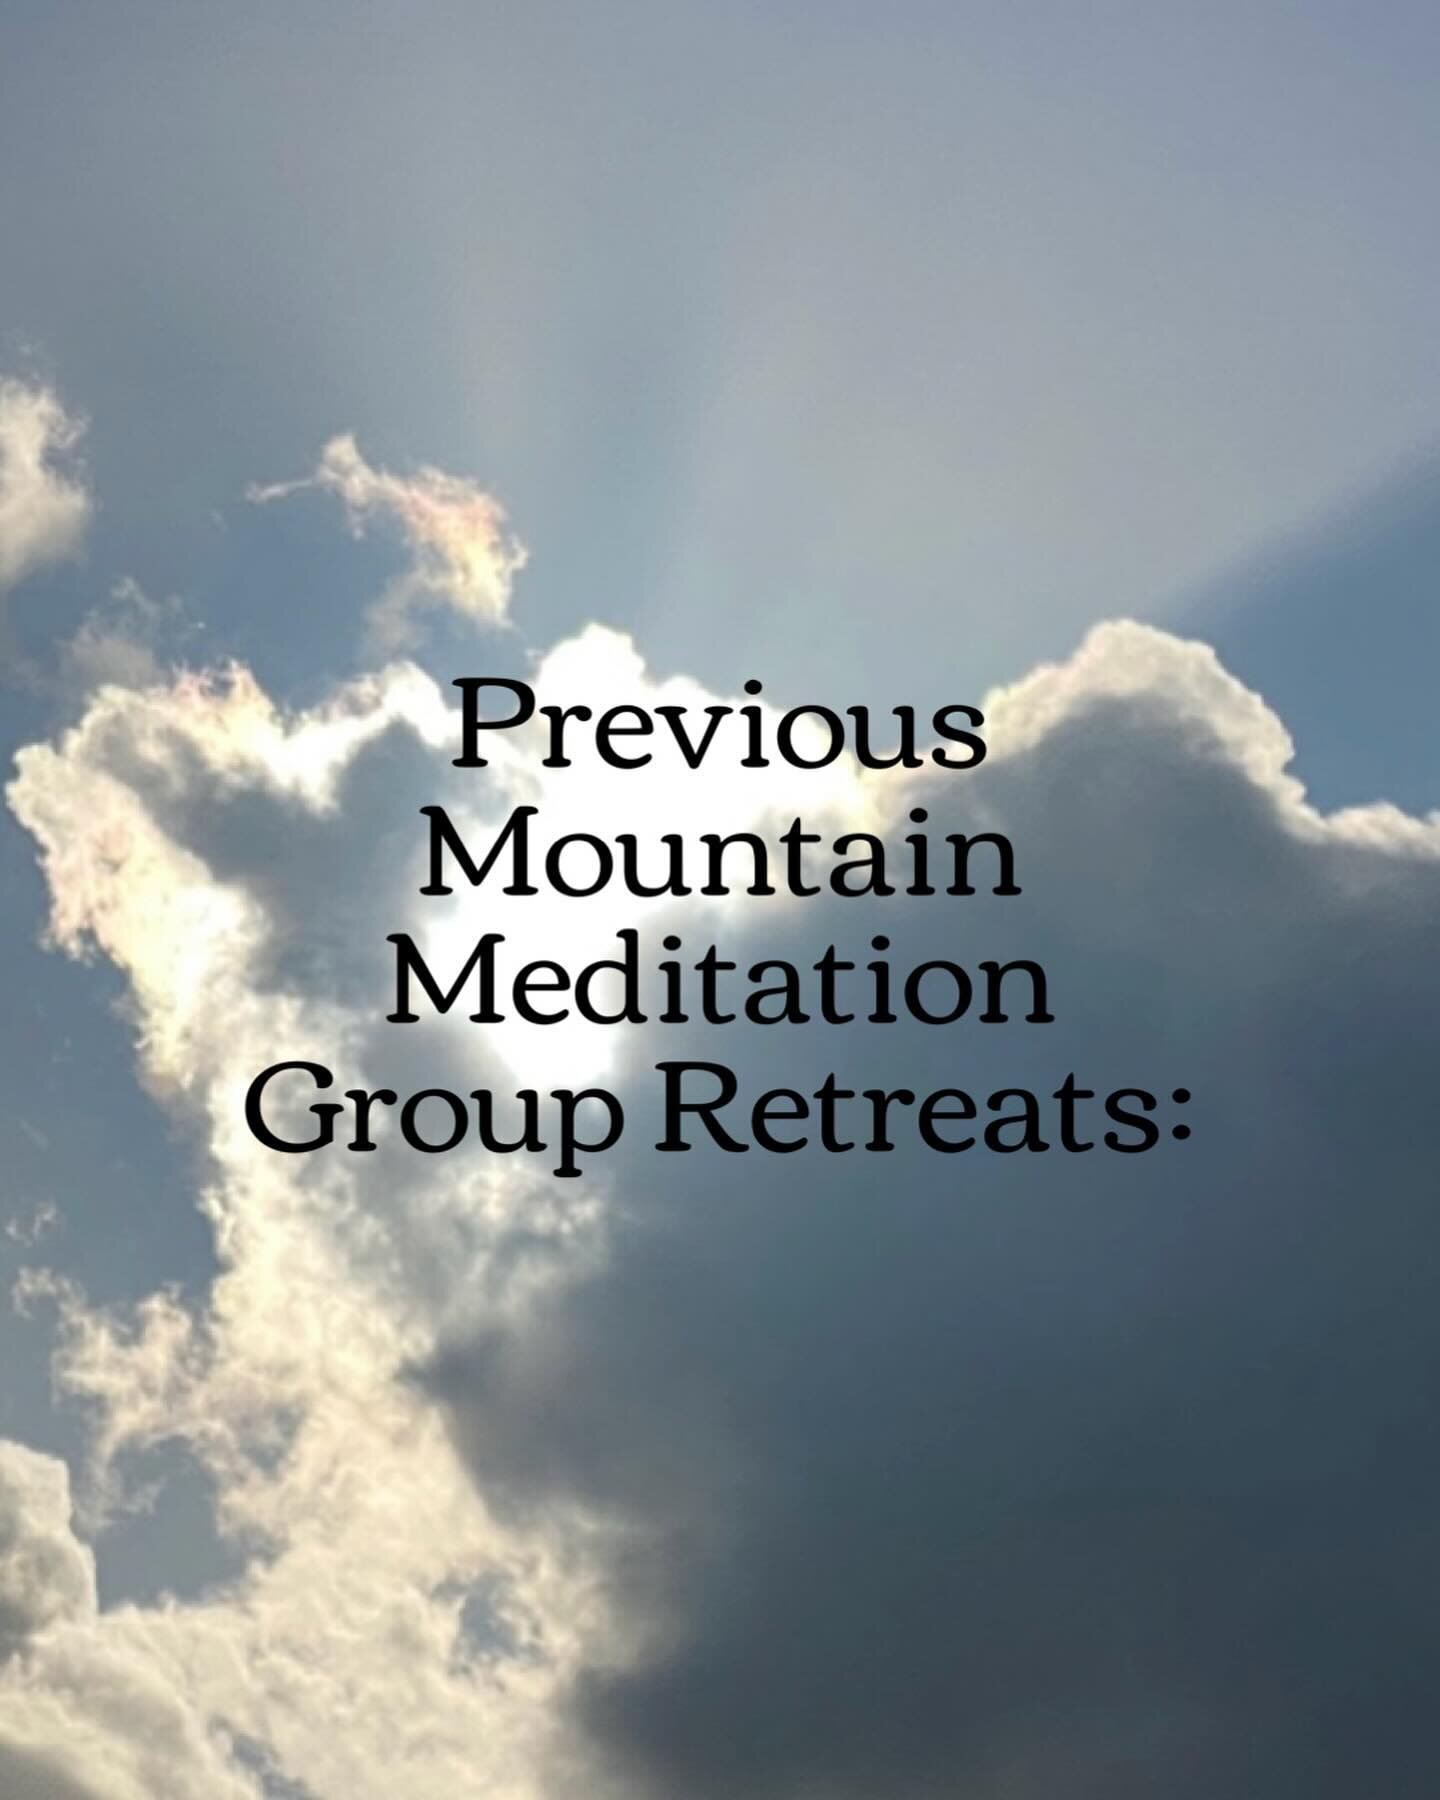 The upcoming silent retreat is Feb 21-25th. 

Click the link in my bio to learn more and register 🙏🏻

🌙✨🏔️

@mountmadonnacenter 

#retreat #silentretreat #meditationretreat #guidedmeditation #meditation #meditationguide #meditationteacher #mindfu